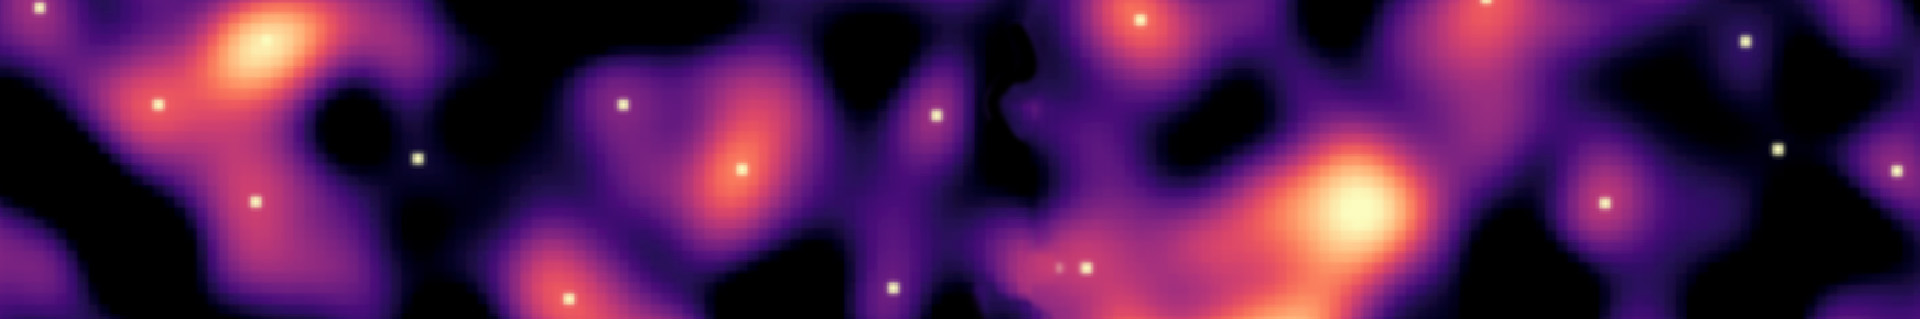 Mapping the dark Universe with gravitational weak lensing – Euclid ...